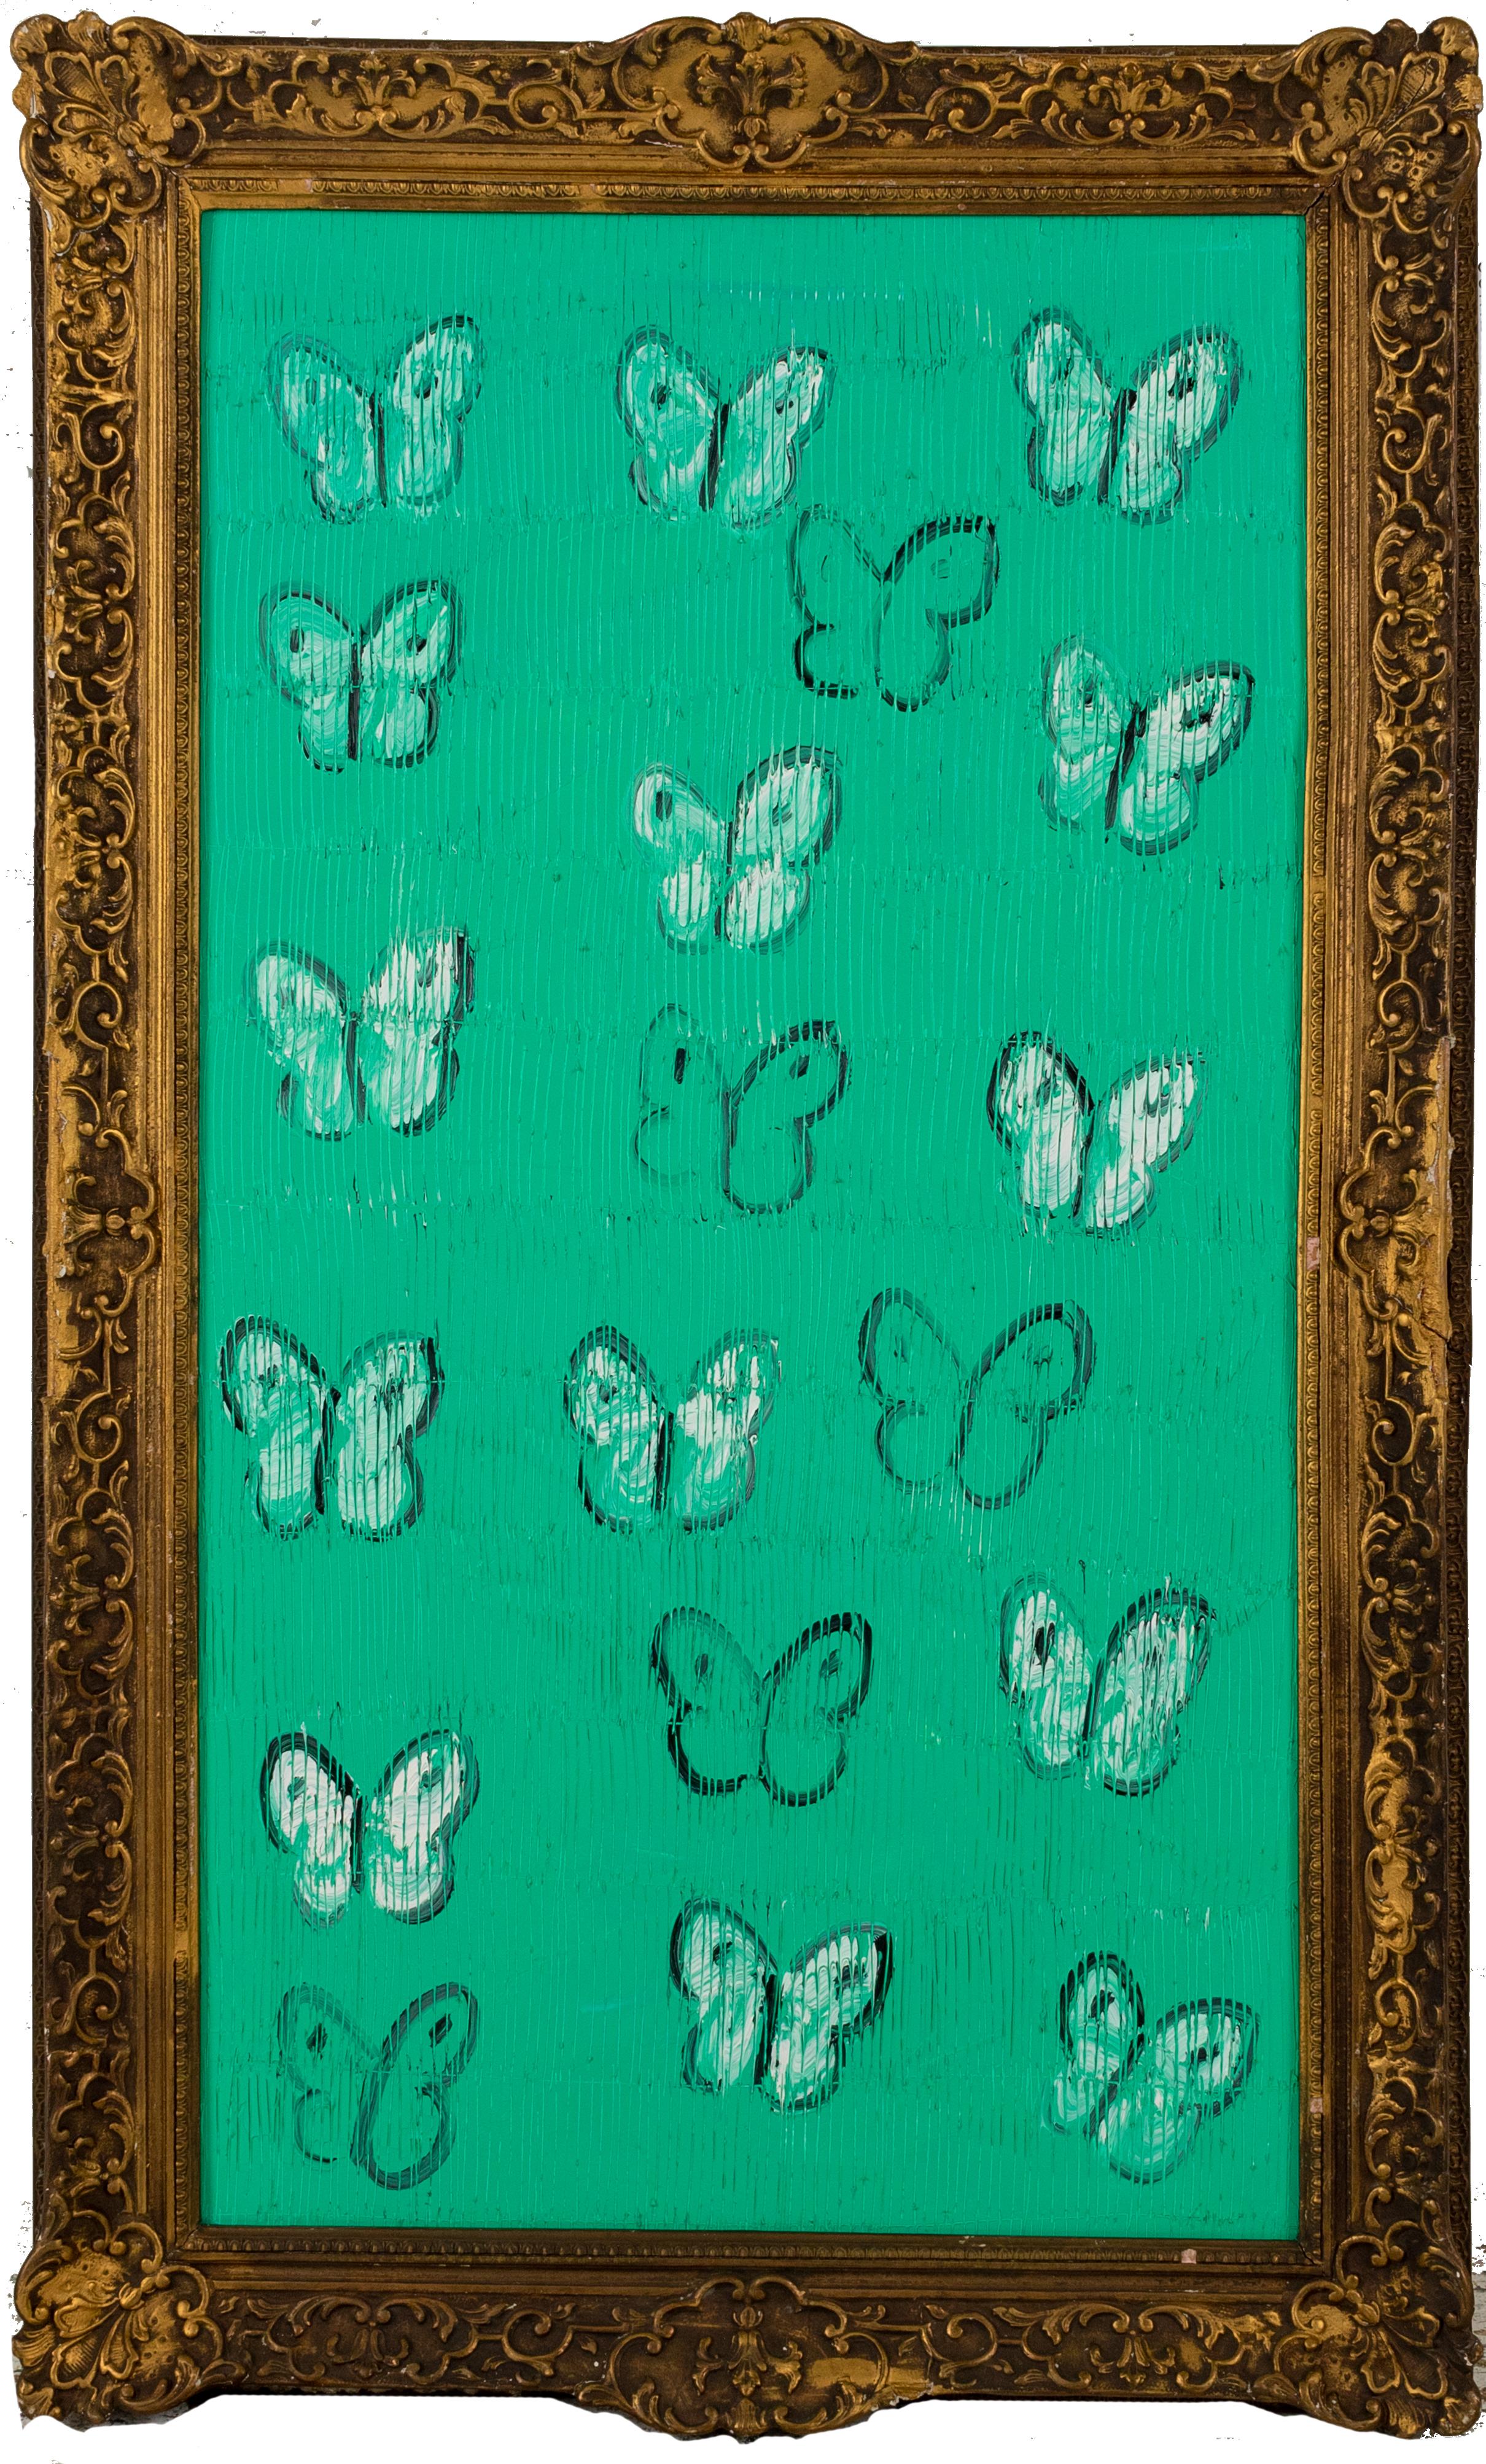 Hunt Slonem "Realm of Senses" Green Butterflies  
Outlined butterflies on an emerald green scored background in an antique frame

Unframed: 47.5 x 26 inches  
Framed: 54.25 x 33 inches  
*Painting is framed - Please note that not all Hunt Slonem